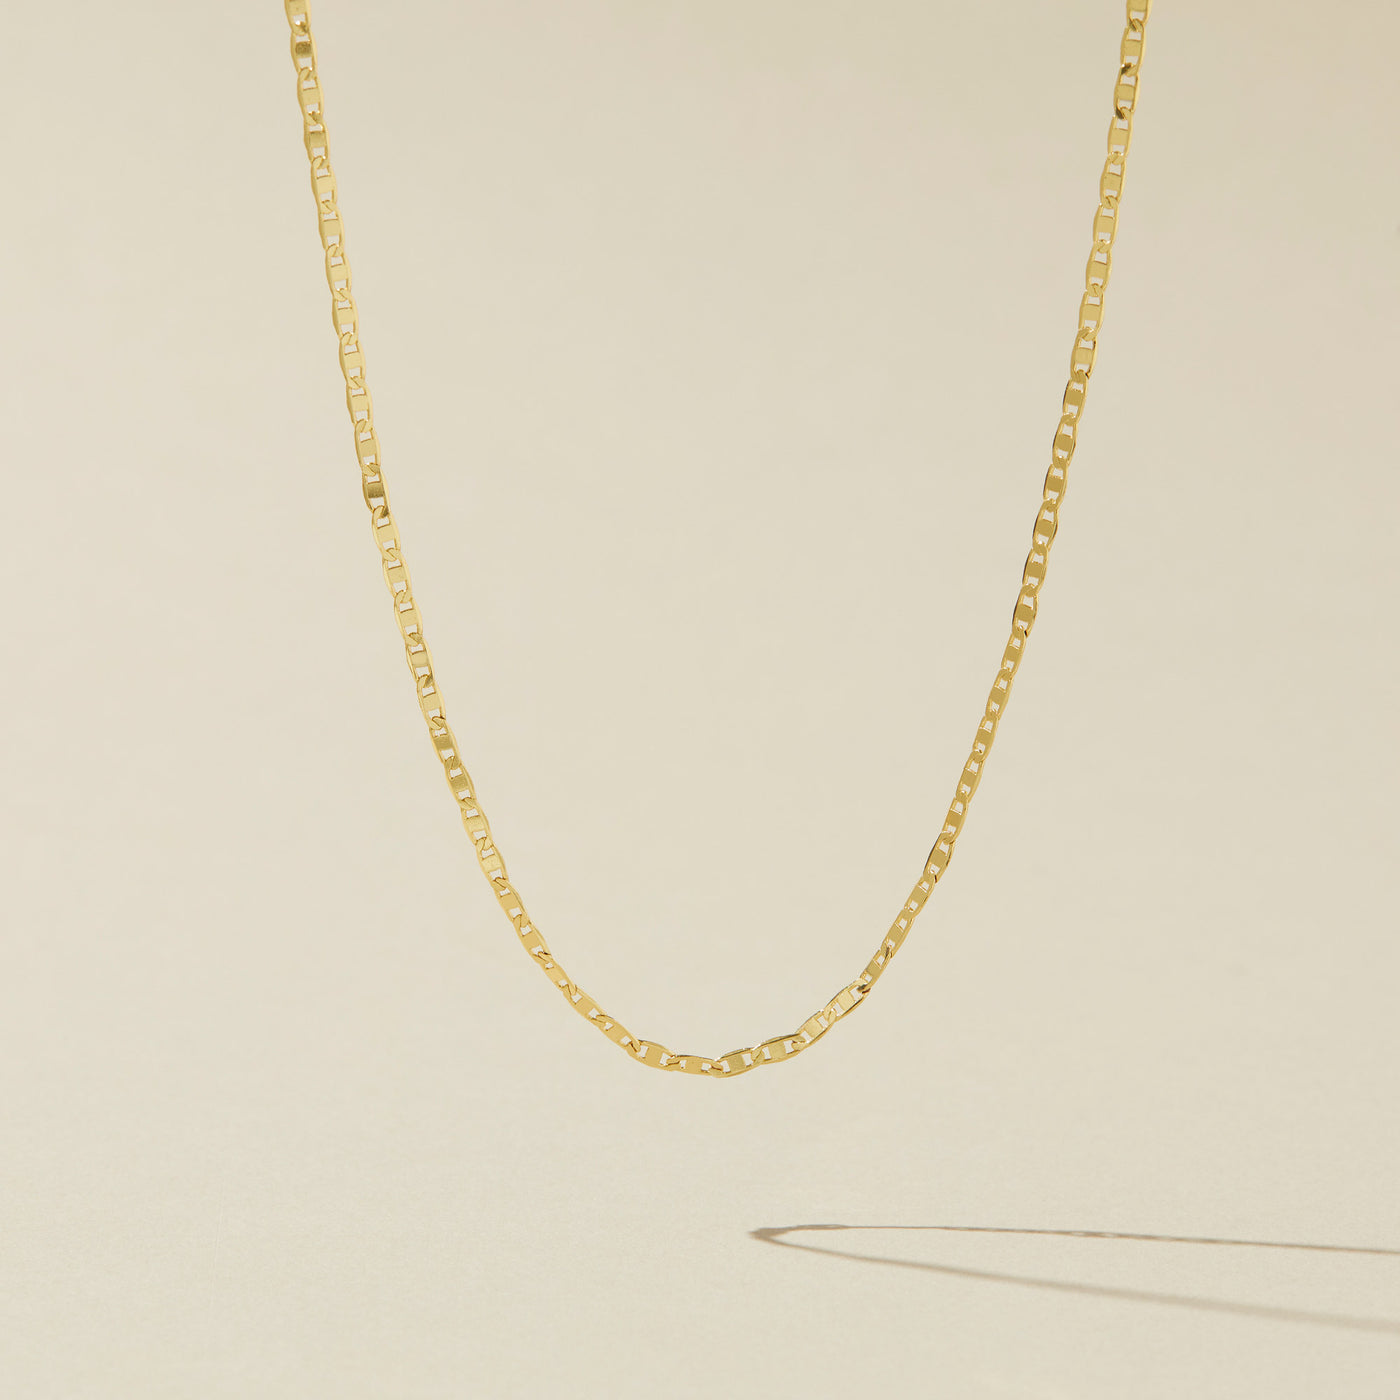 Sequin chain necklace gold fill